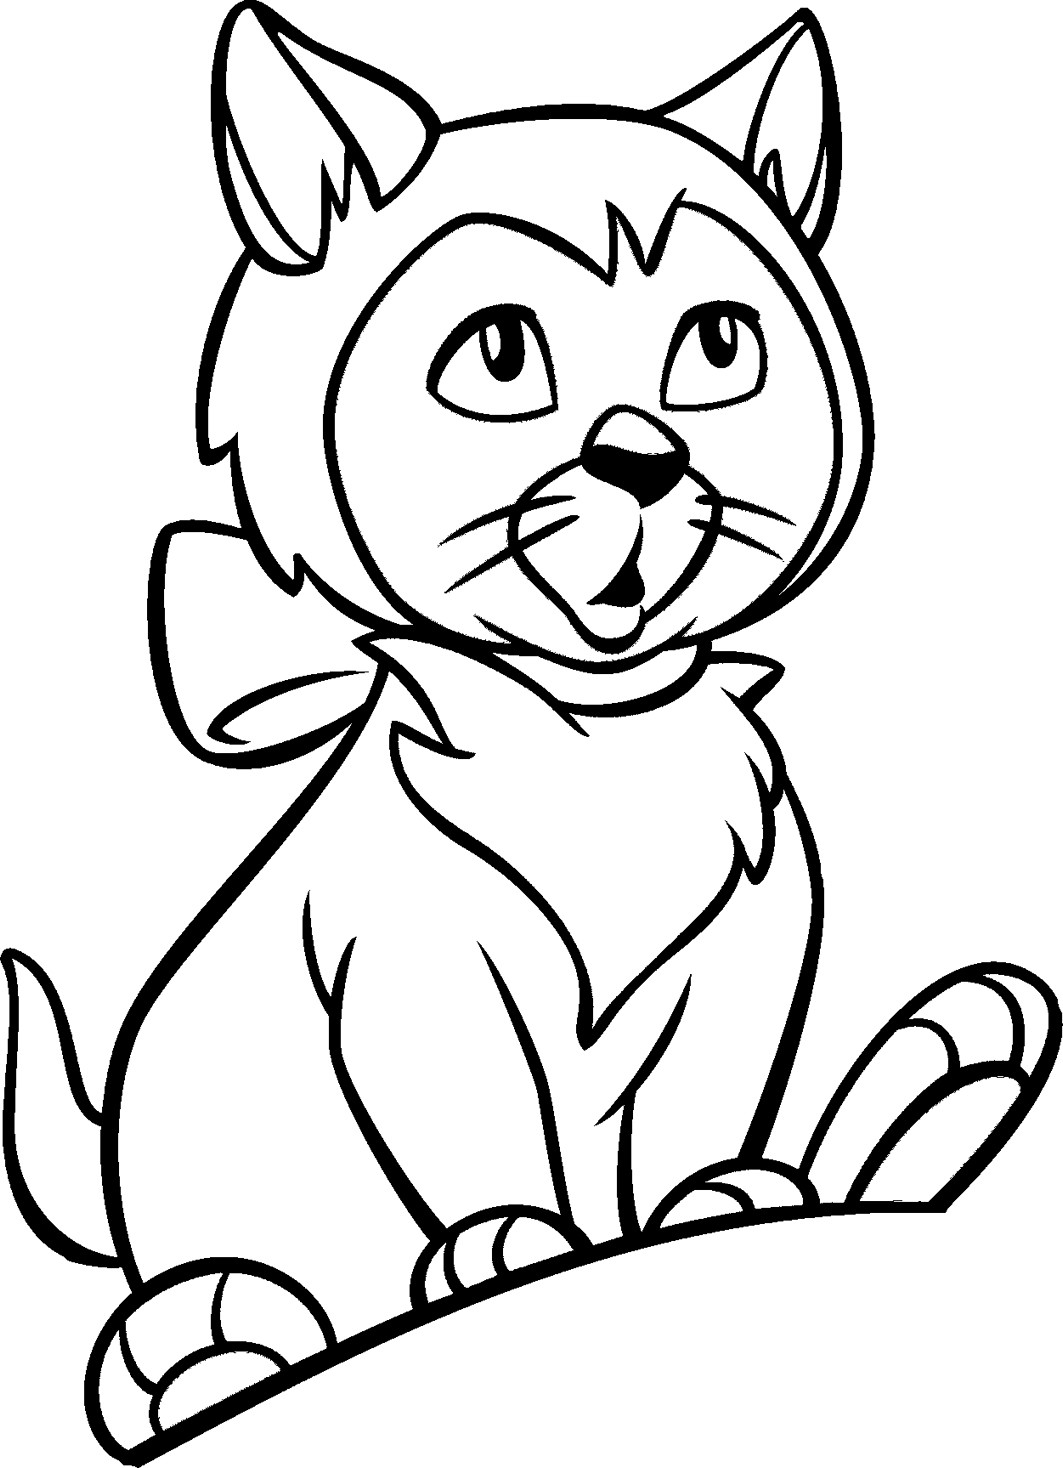 Coloring-Pages-Kids
 Coloring Pages for Kids Cat Coloring Pages for Kids